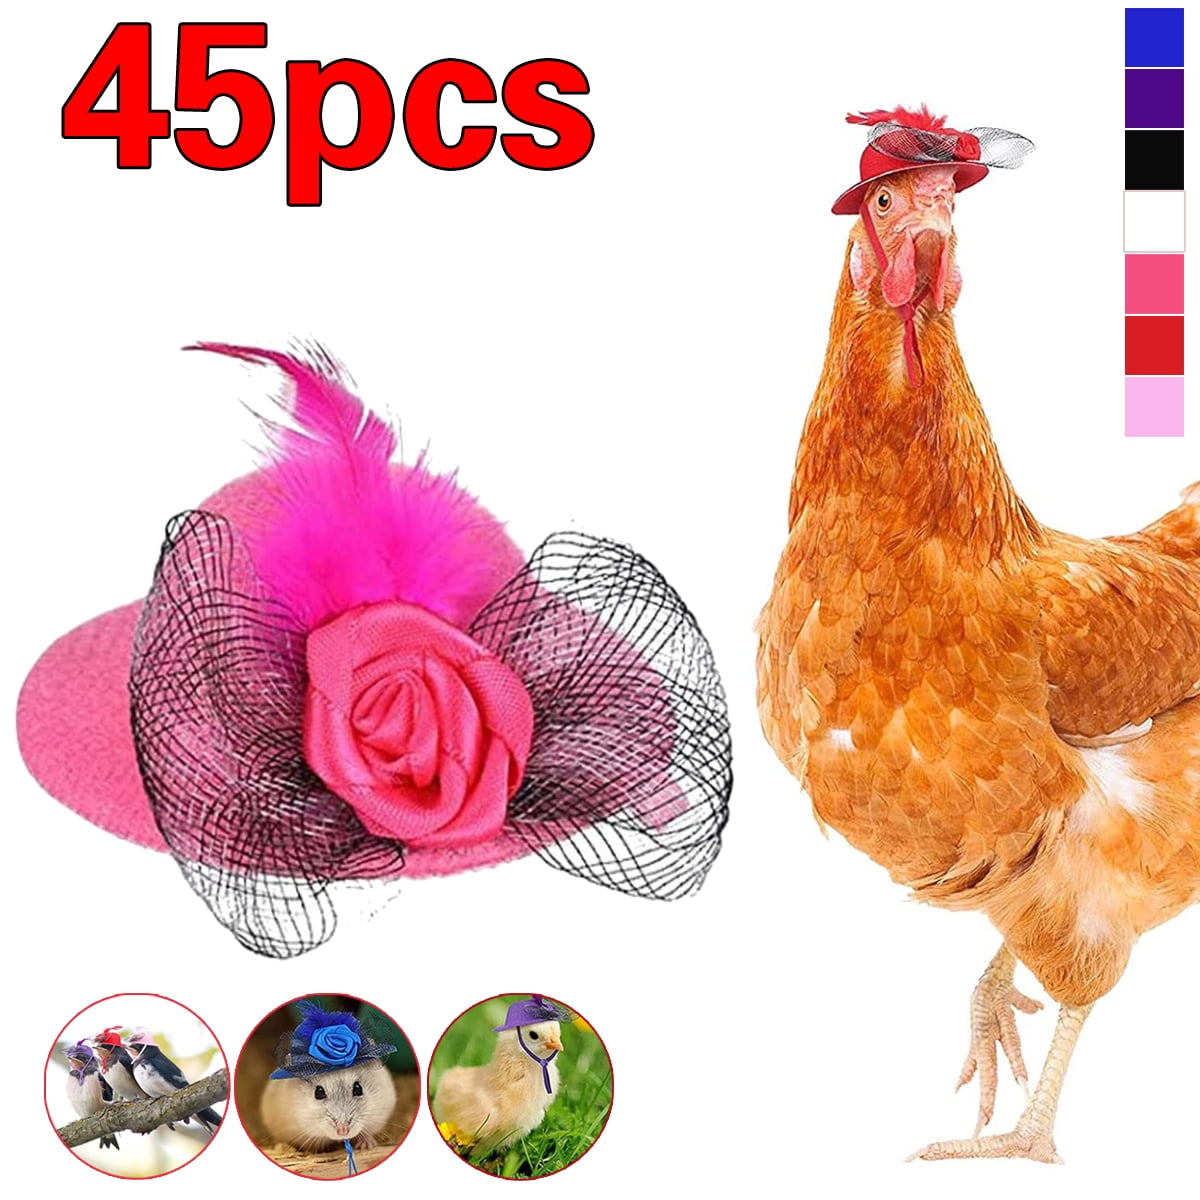 Black 8 Protect The Head of The Chicken Funny Protection Hen Hard Hat Chicken Helmet Hens for Parakeet Cockatiels Bird Chicks for Conure Lovebird 